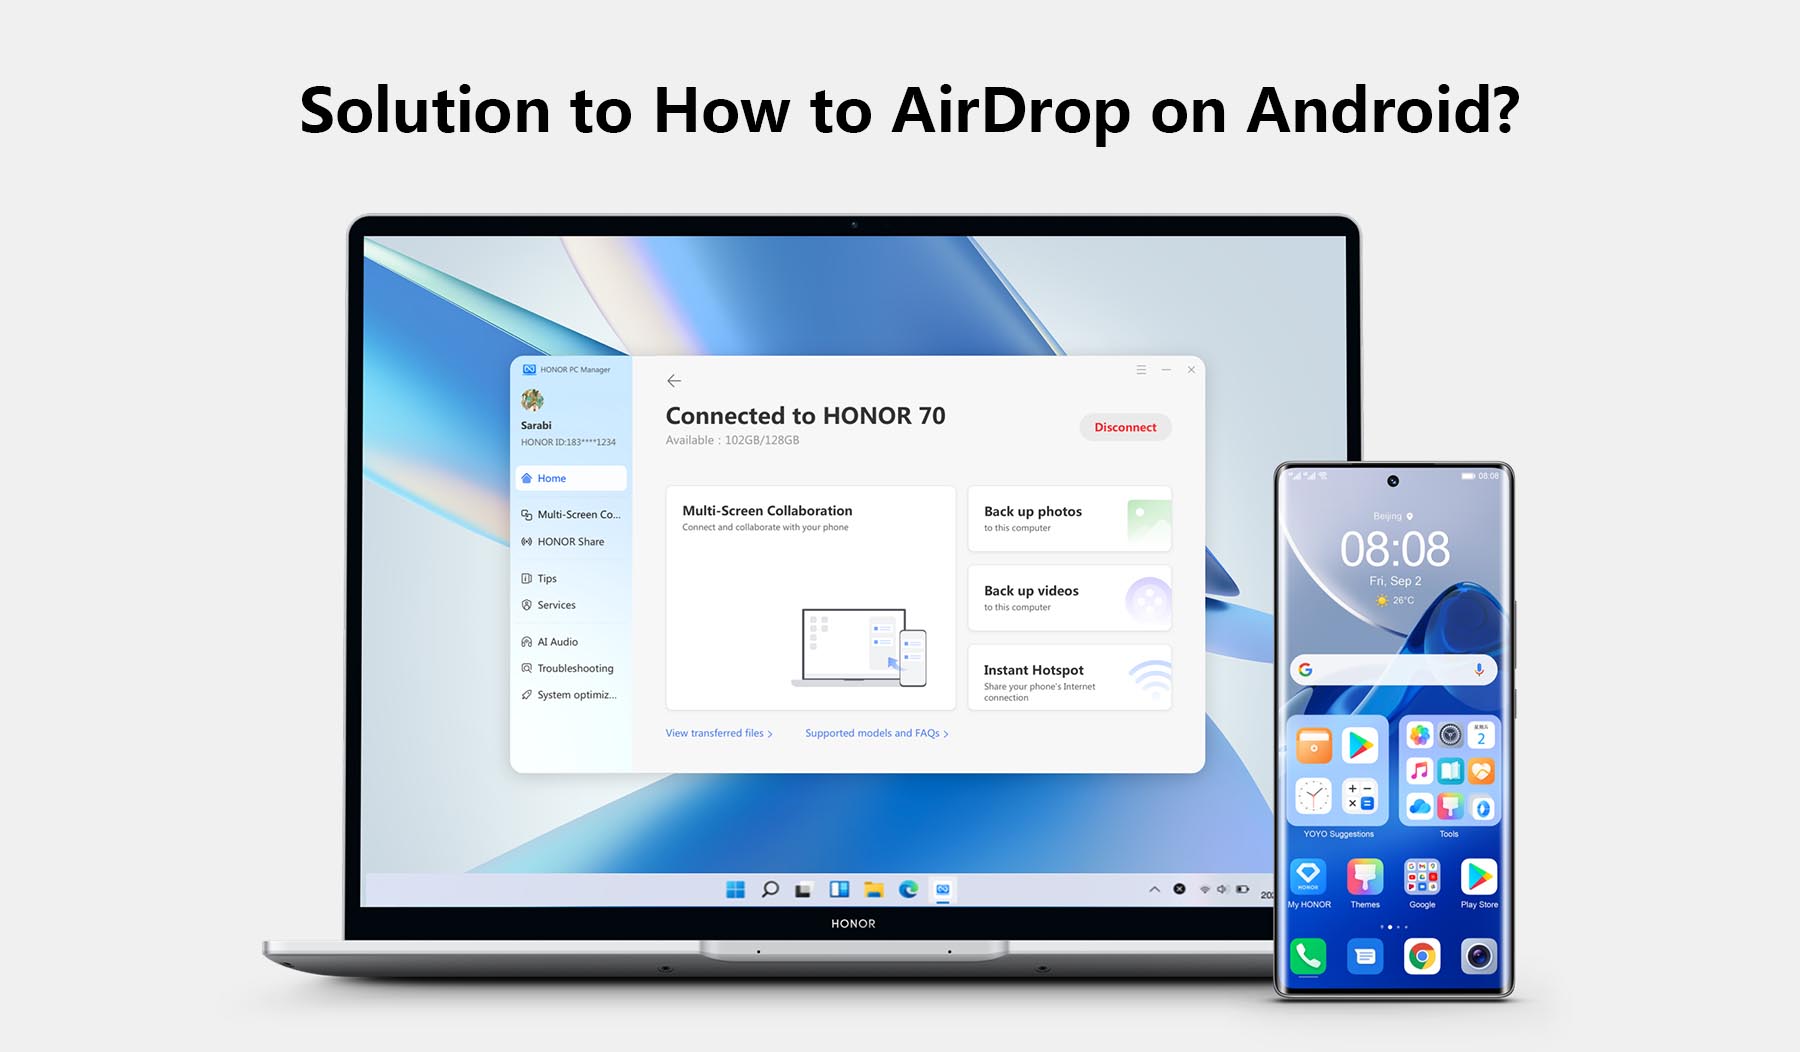 Solution to How to AirDrop on Android